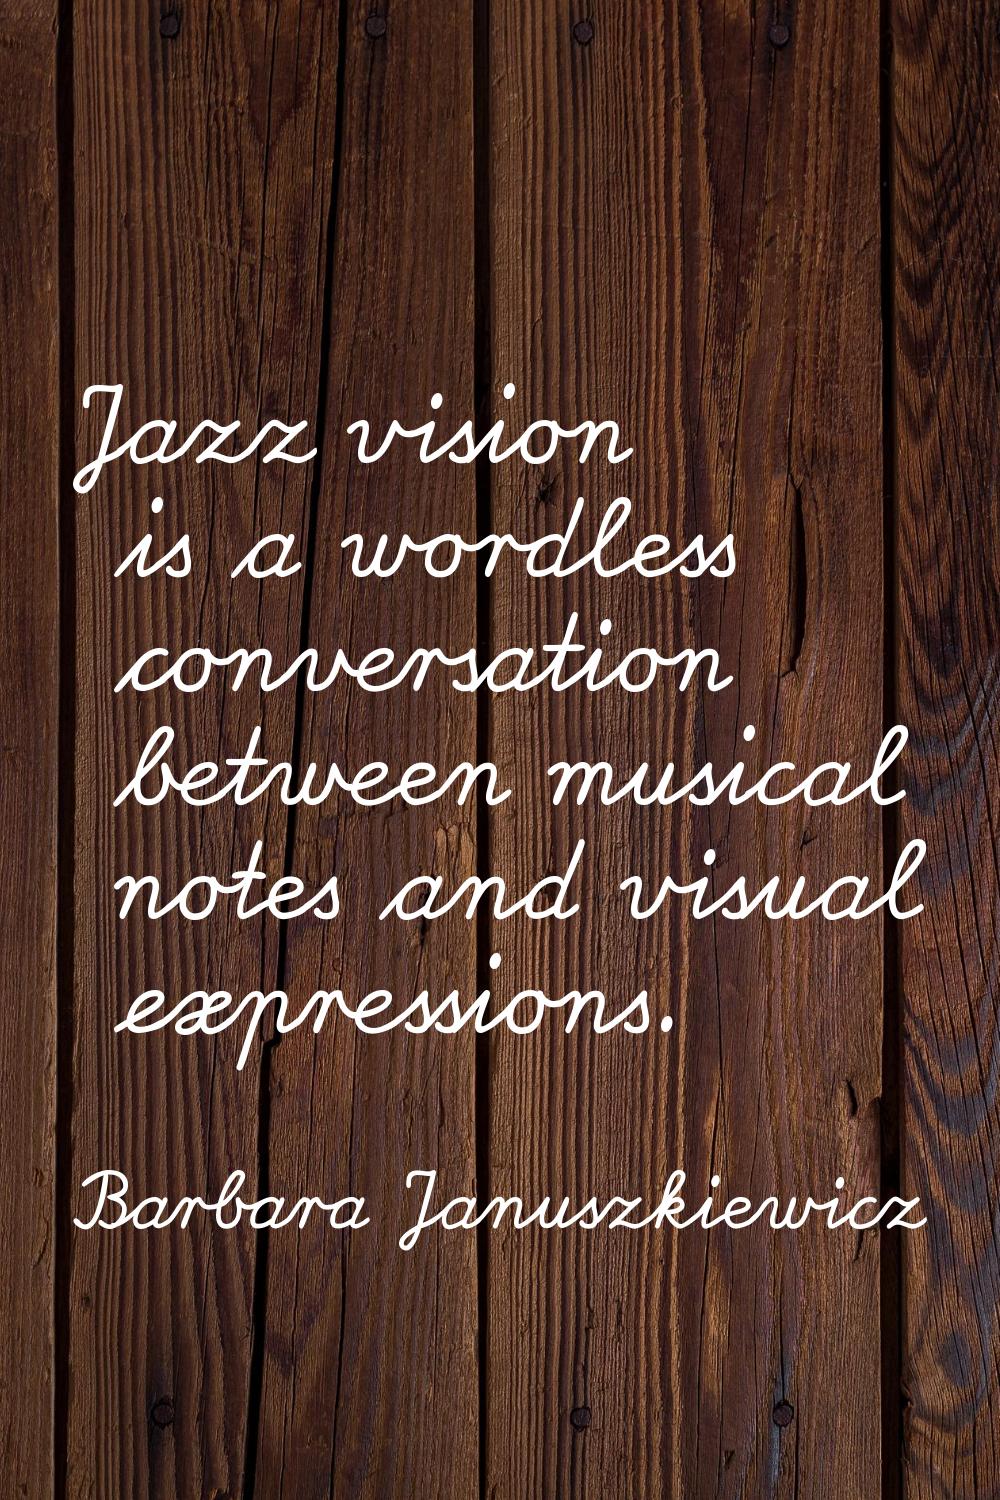 Jazz vision is a wordless conversation between musical notes and visual expressions.